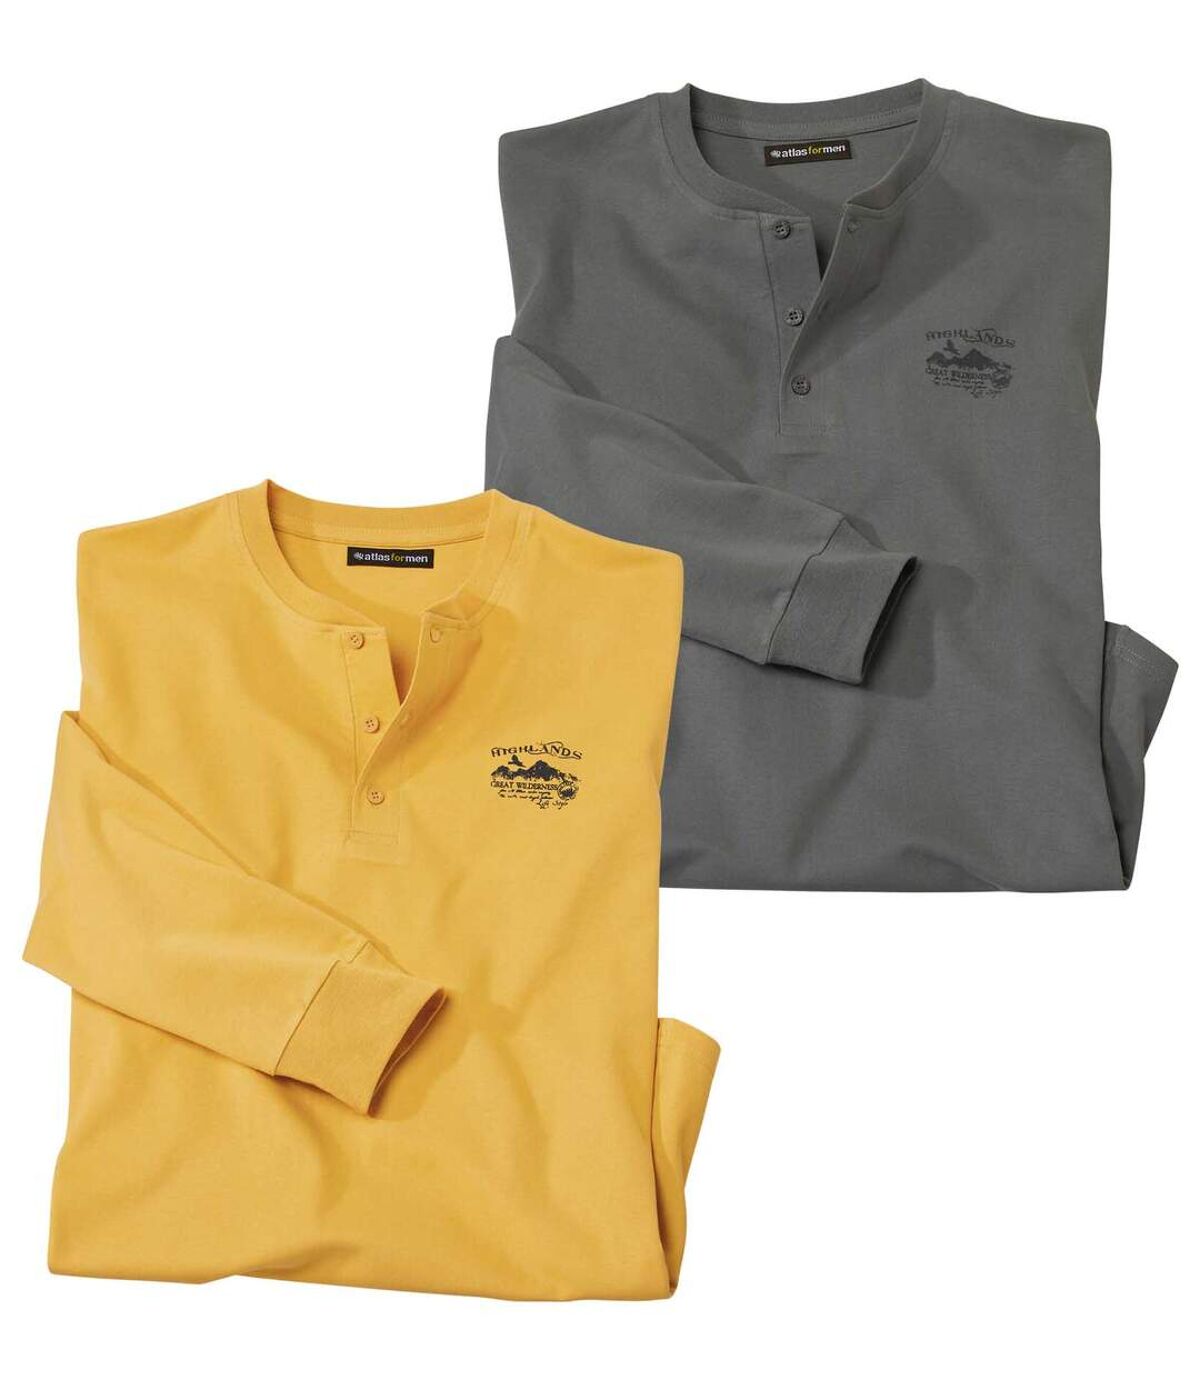 Pack of 2 Men's Casual Tops - Anthracite Yellow Atlas For Men